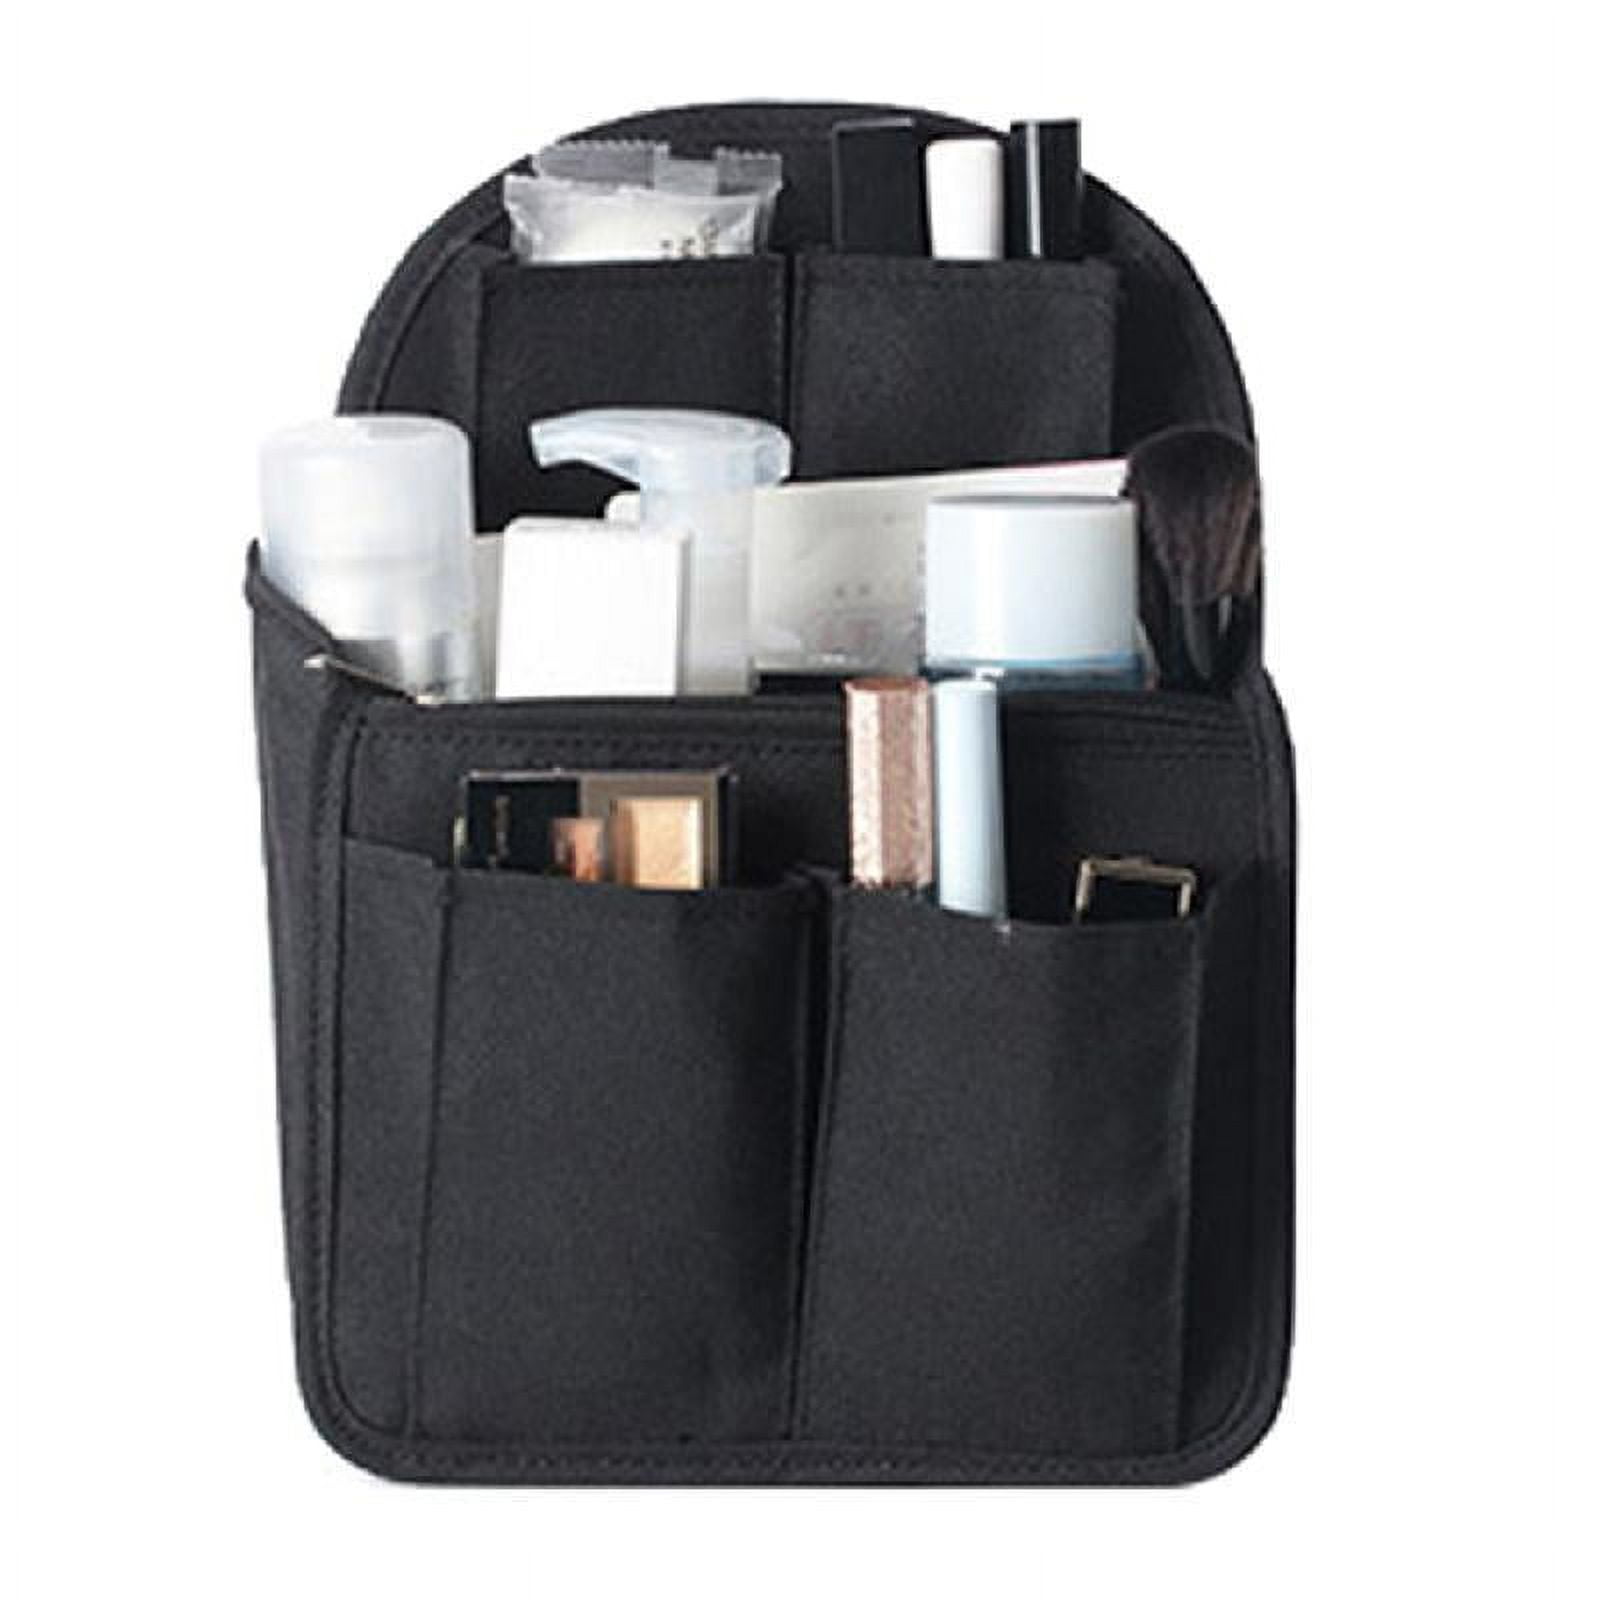 Easy Pouch on Strap Organizer / Easy Pouch on Strap Insert